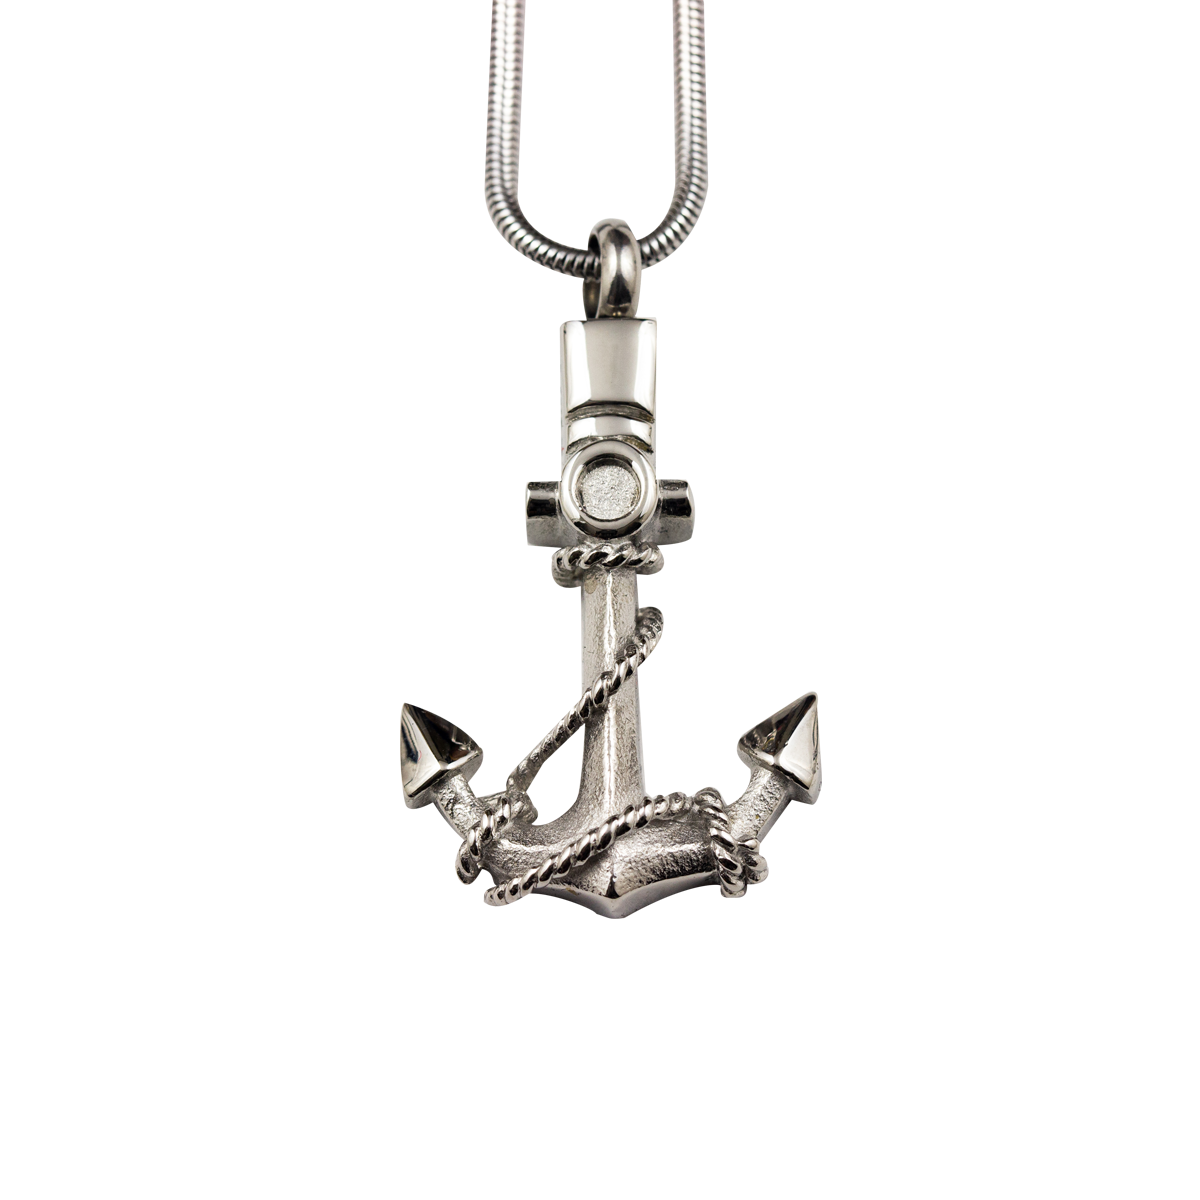 Anchor Stainless Steel Pendant